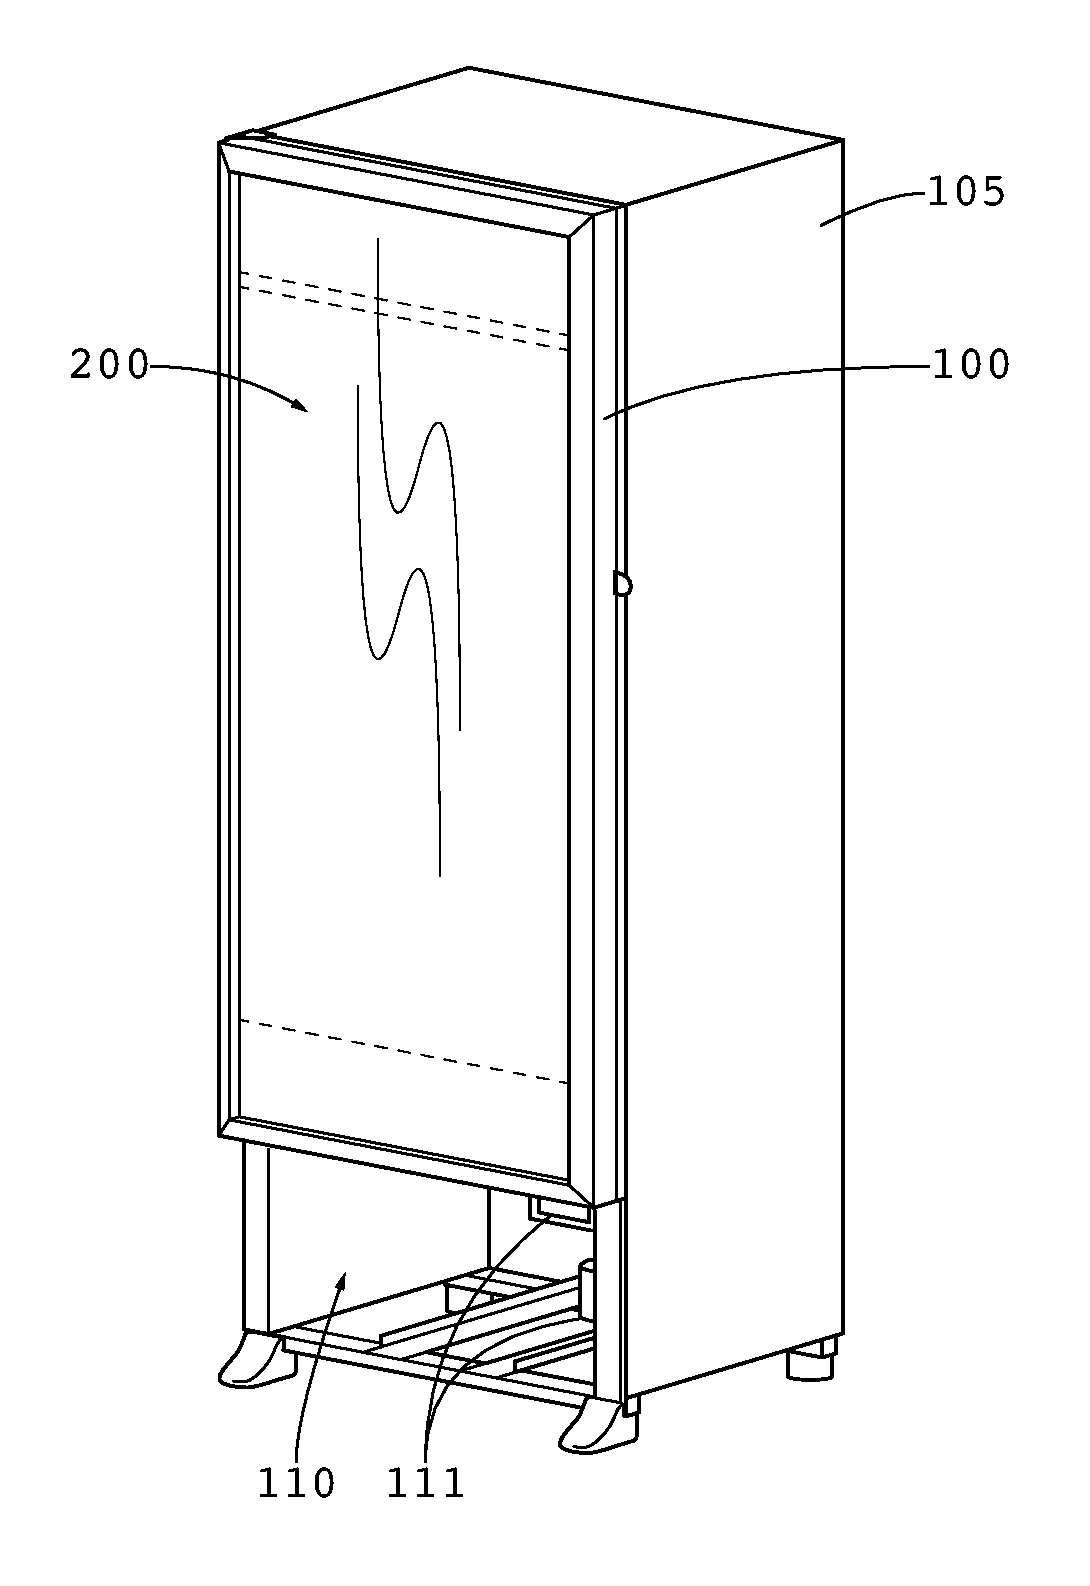 Cooling system for liquid crystal display